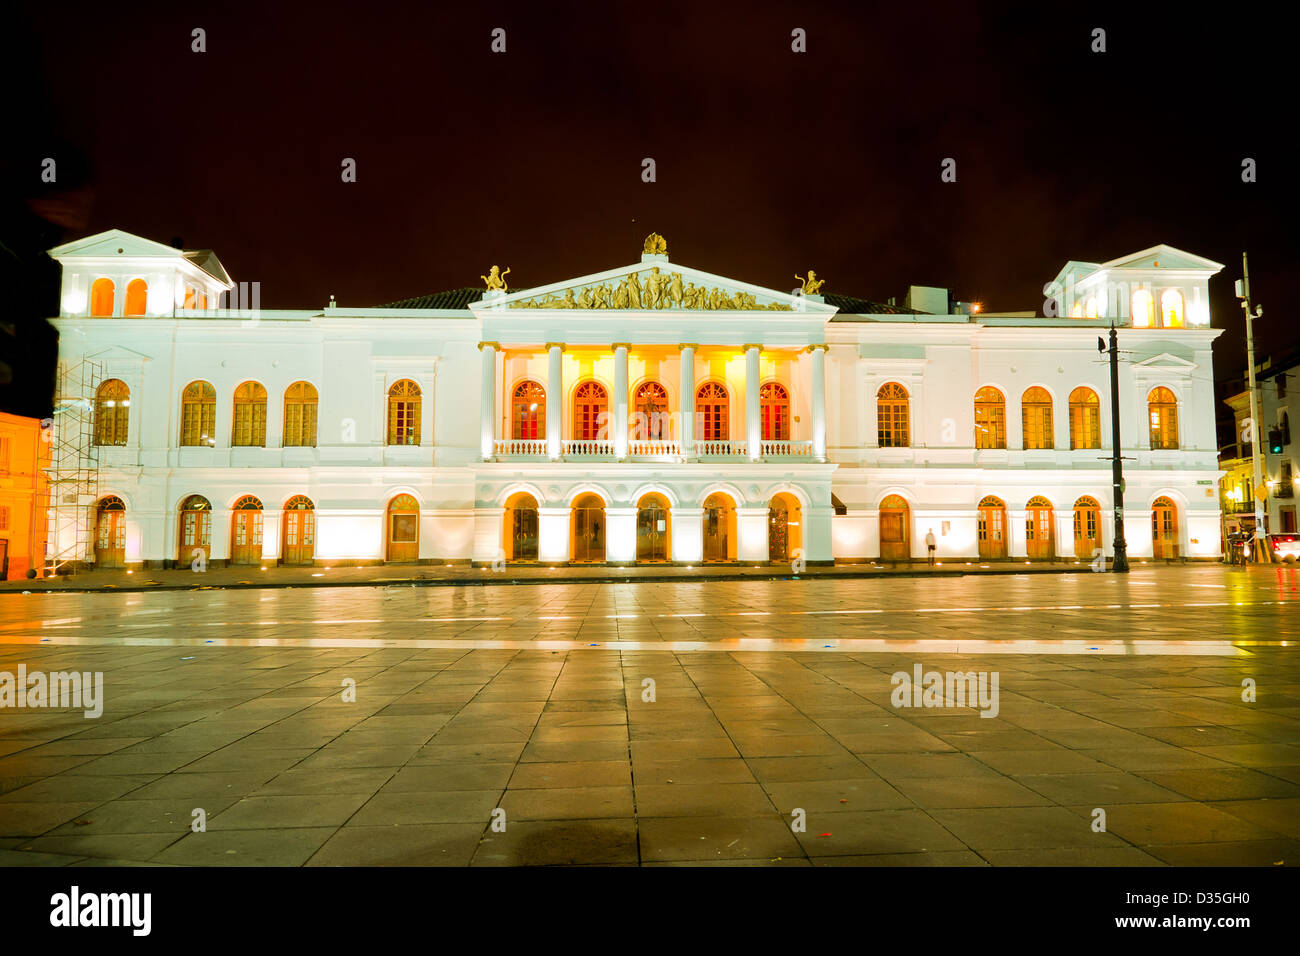 Sucre Theater is located in old town Quito, the capital of Ecuador. NIght shot Stock Photo